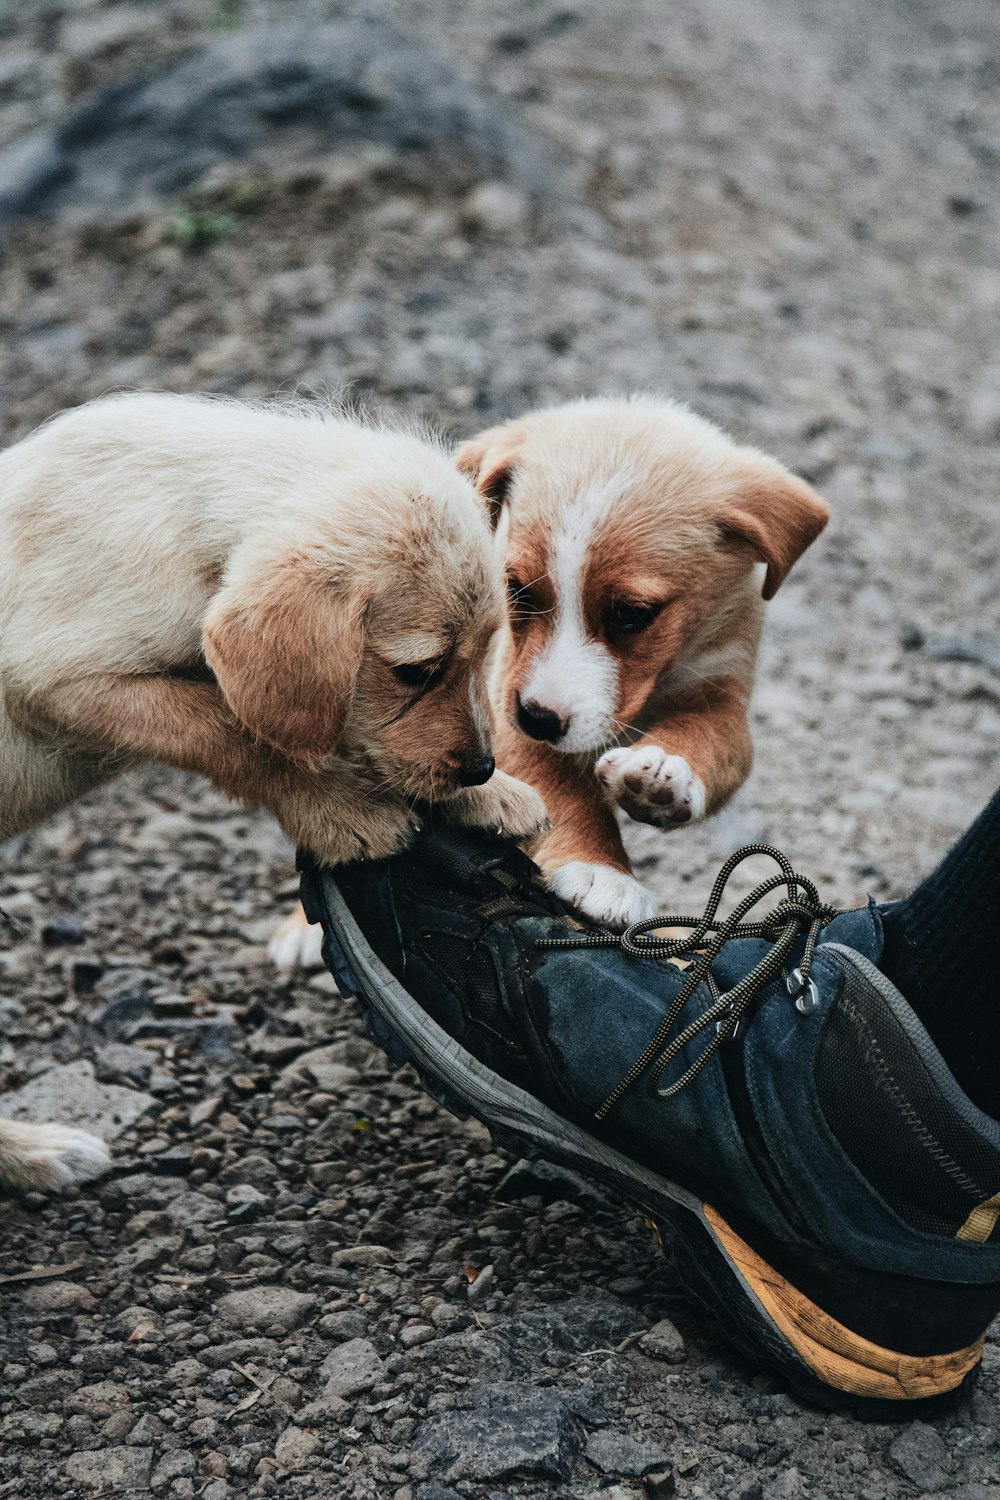 two puppies playing with a shoe on the ground